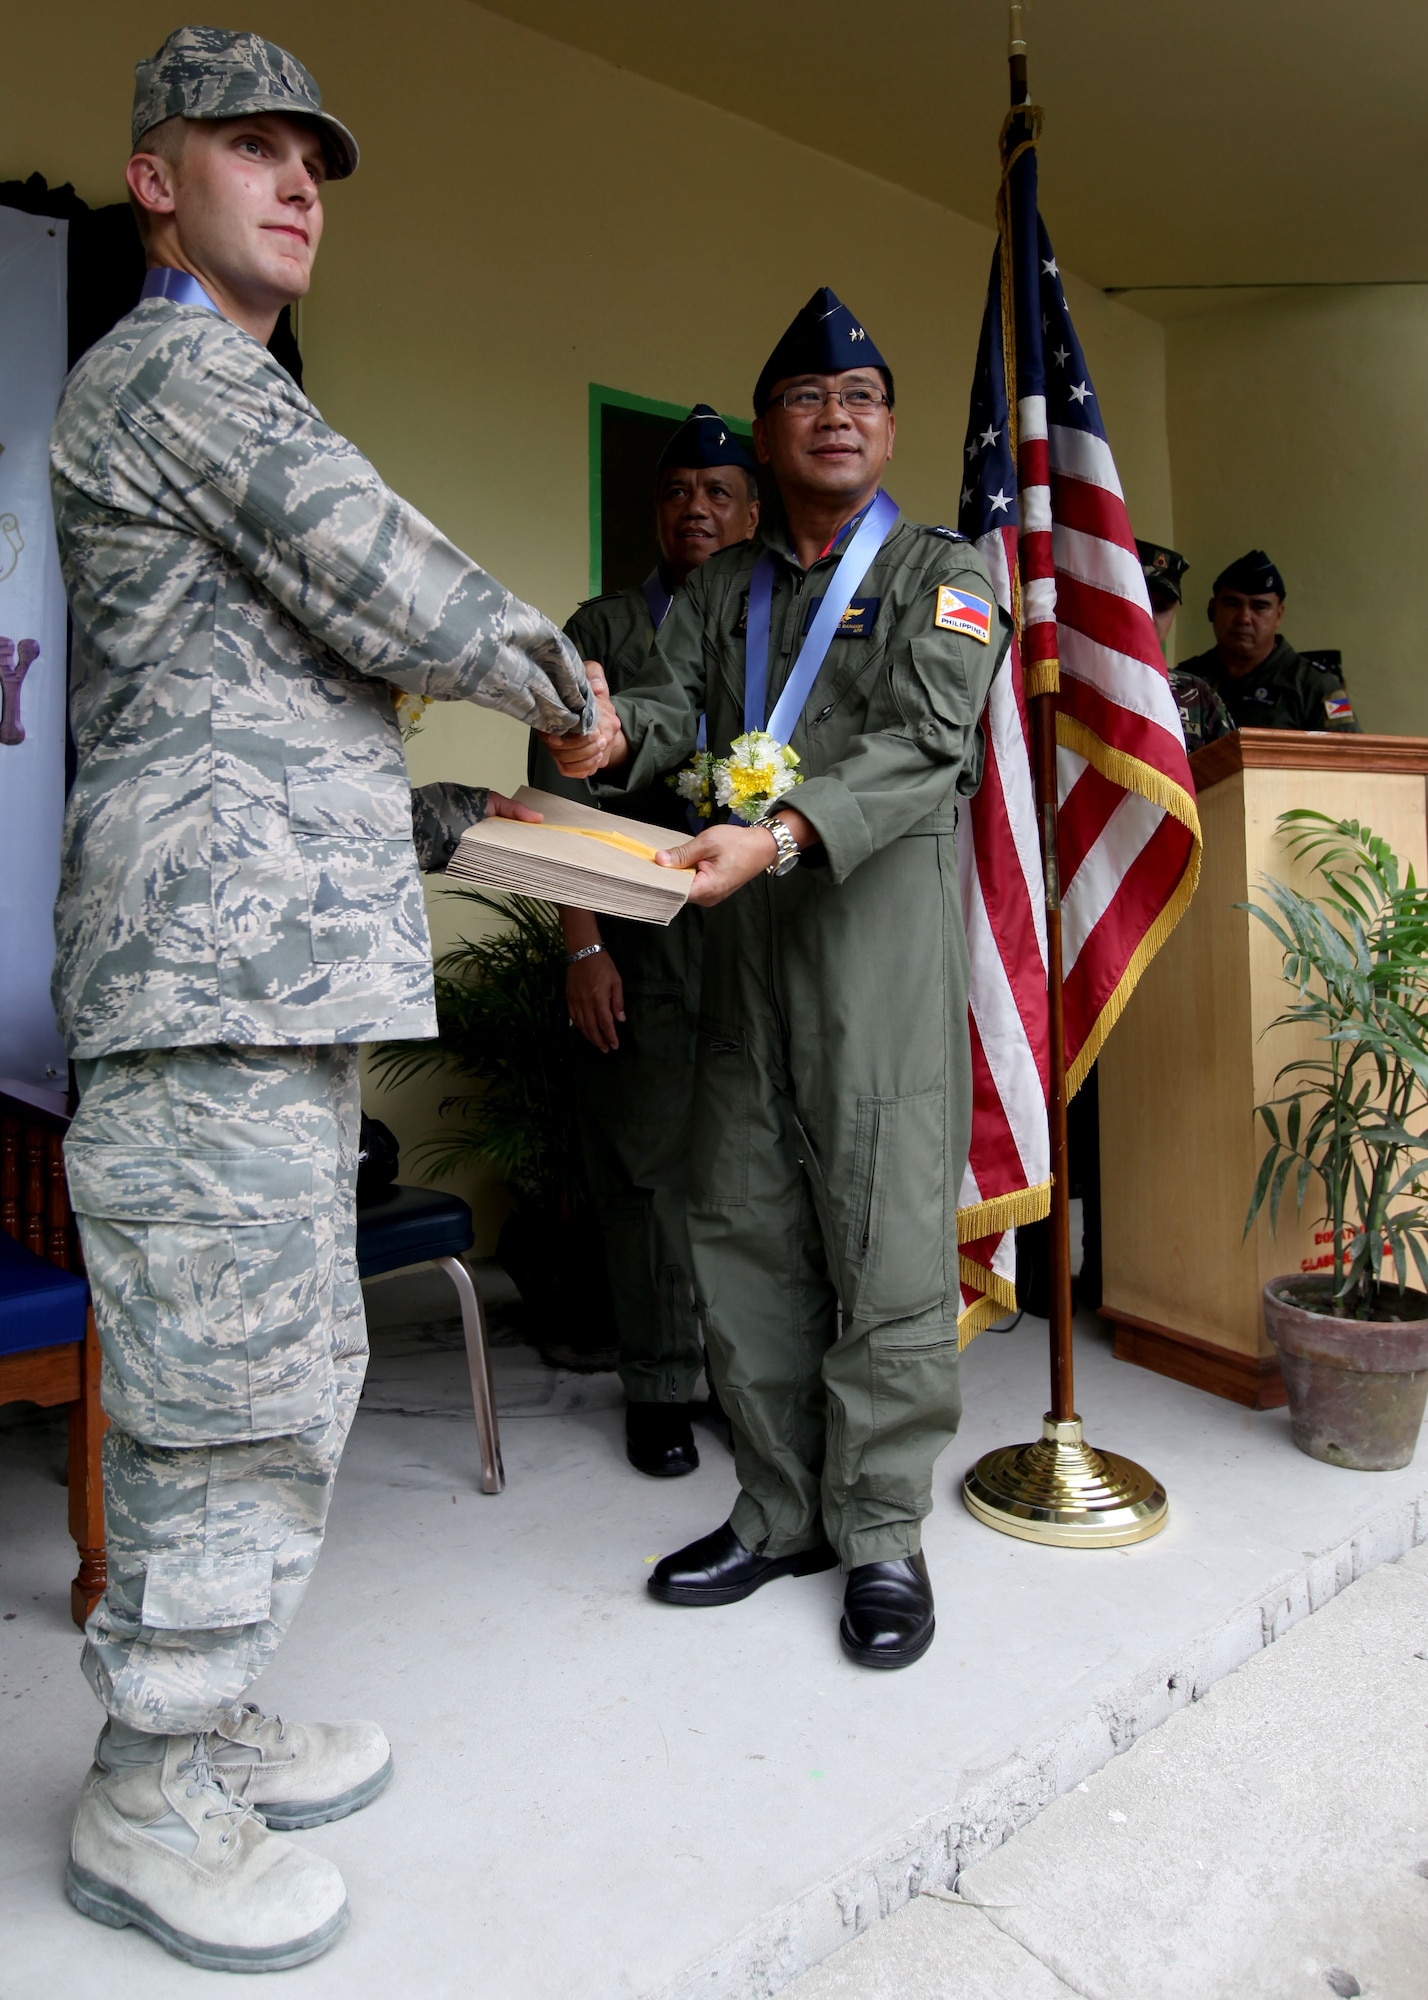 U.S. Air Force 1stLT Andrew Mcperson recieves letters
of appreciation to him and his fellow Airmen from
Republic of the Philippines Air Force MGen Ricardo
Banayat during a dedication ceremony at Clark Air
Force Base, Republic of the Philippines on September
20, 2012. U.S. Air Force Civil Engineering Squad 647
out of Joint Base Pearl Harbor teamed up with the
Republic of the Philippines Air Force to build an
addition onto a local schoolhouse before dedicating it to
the community. The U.S. military and Republic of the
Philippines military work together to strengthen
interoperability between the Philippine and U.S.
government. (U.S. Marine Corps photo by LCpl Katelyn
Hunter/Released).